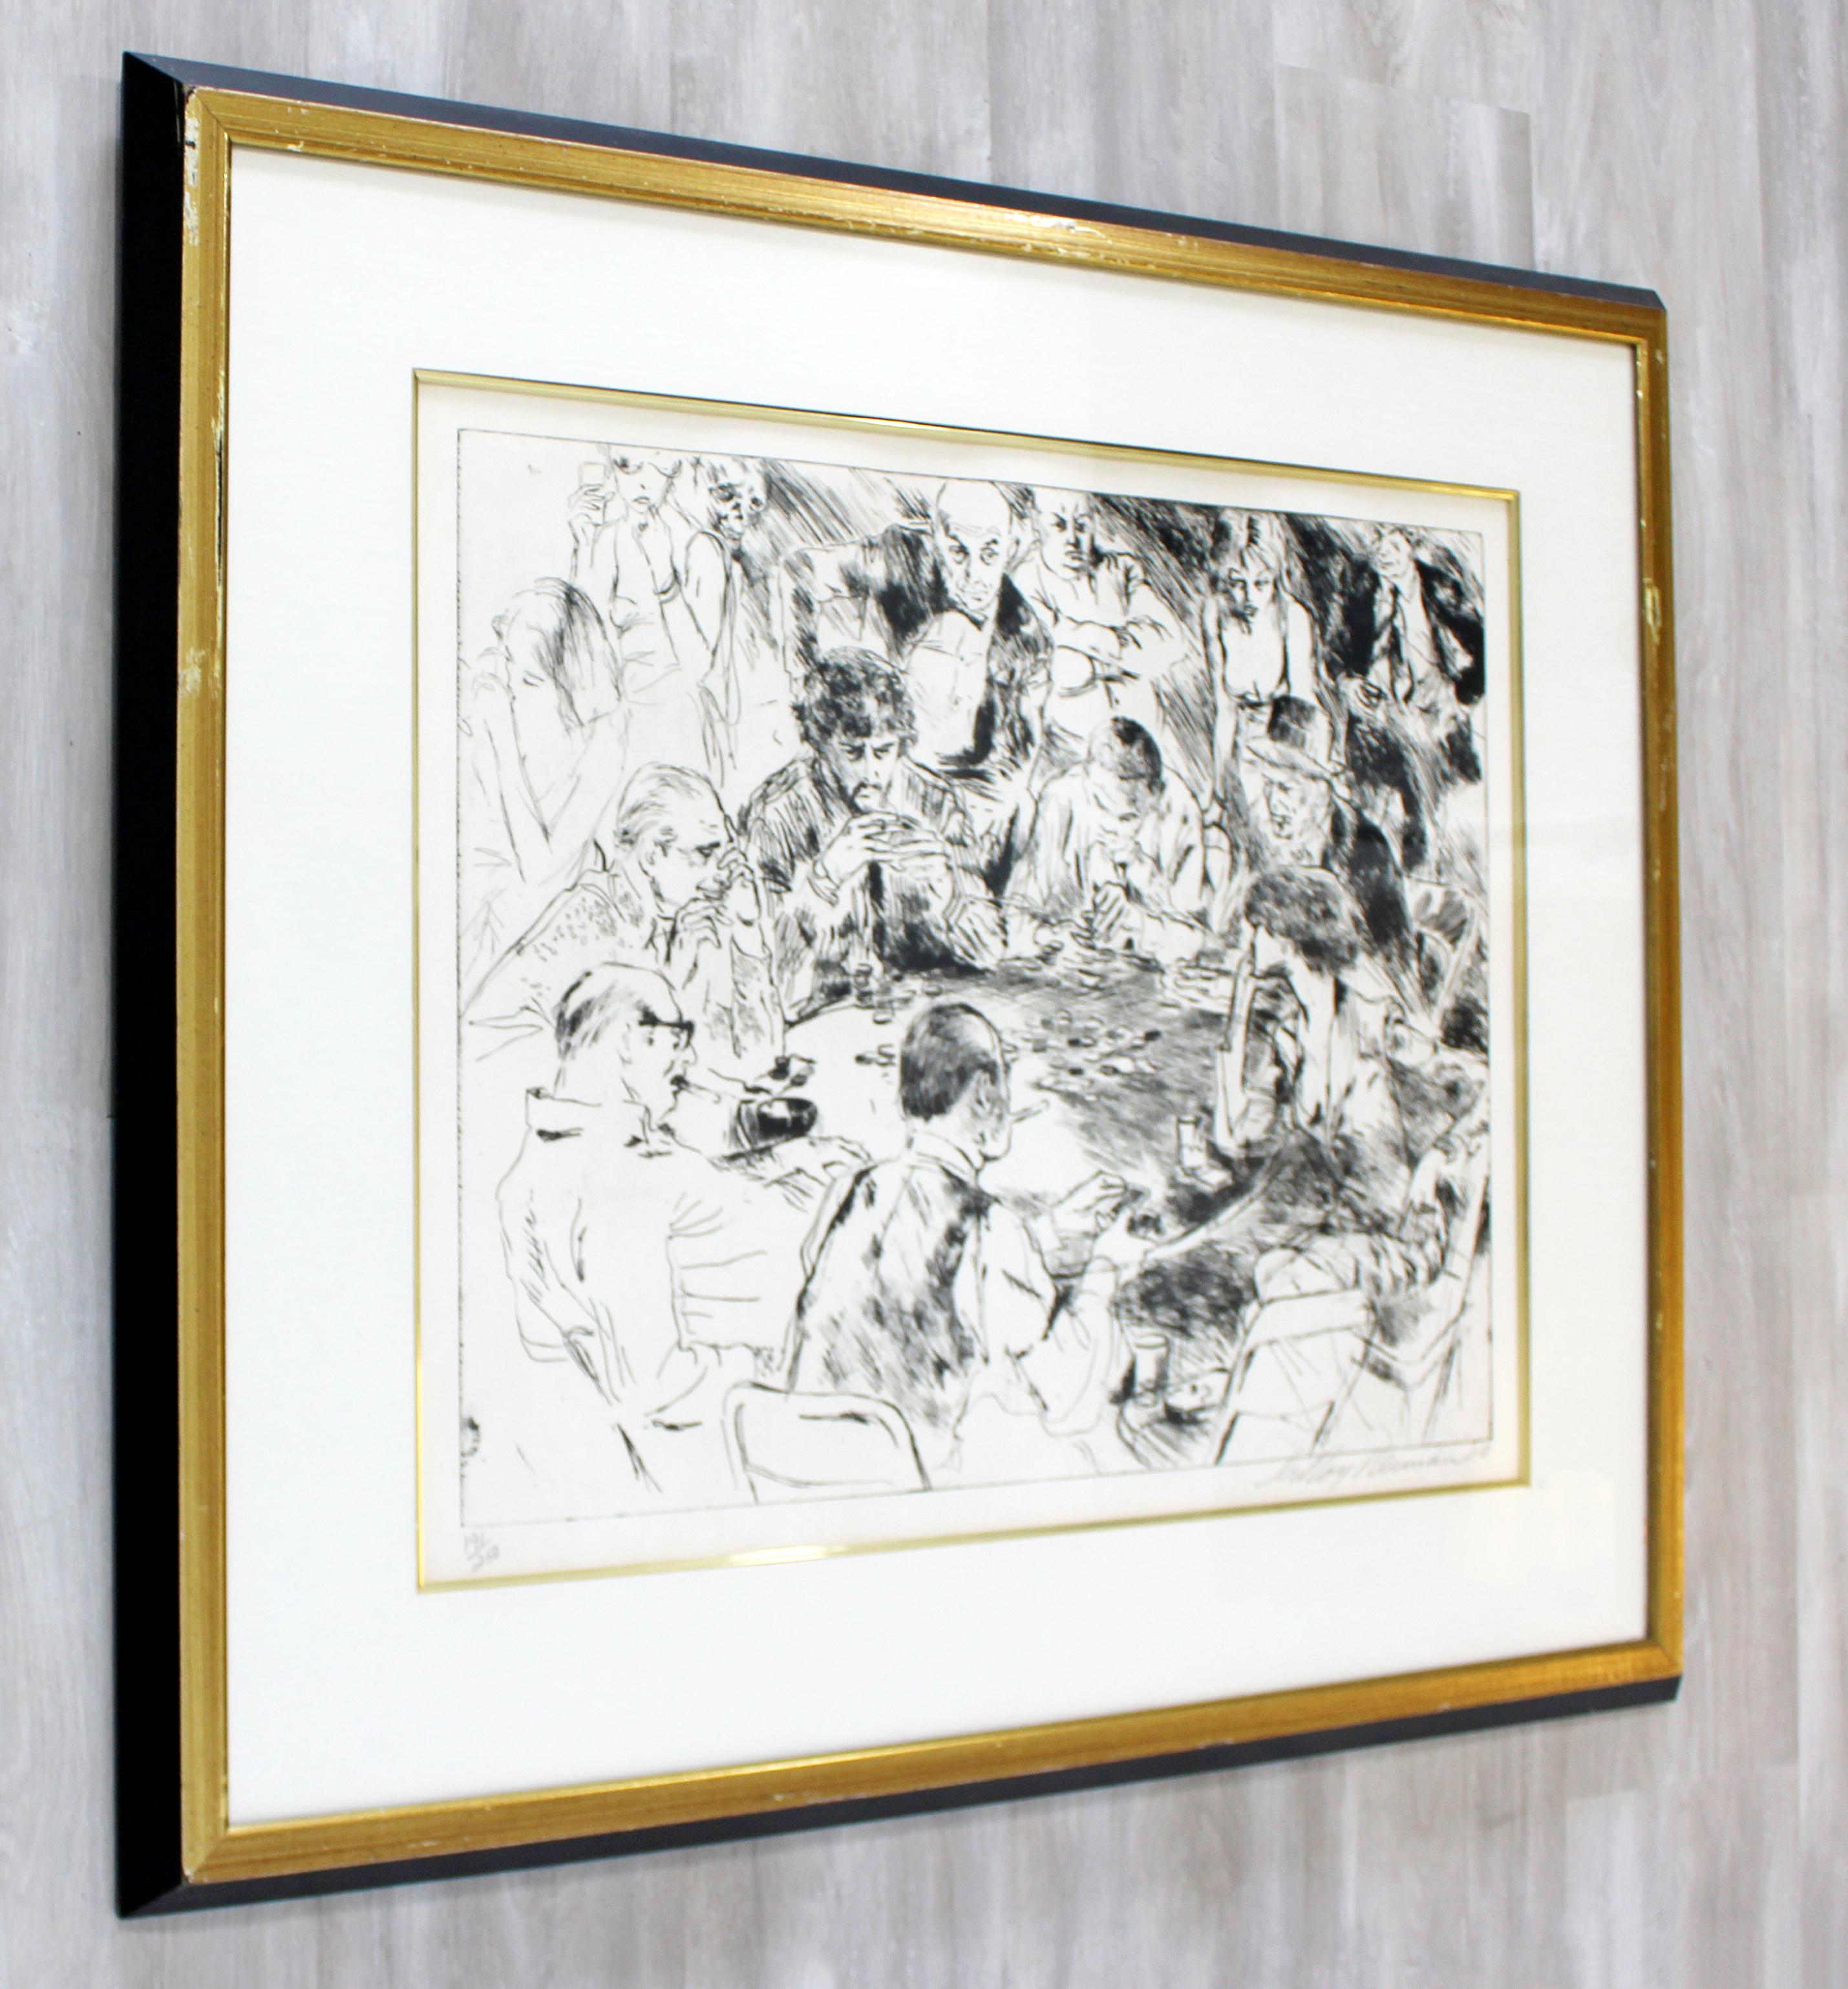 American Mid-Century Modern Framed Game of Life Etching Signed Leroy Neiman 191/250